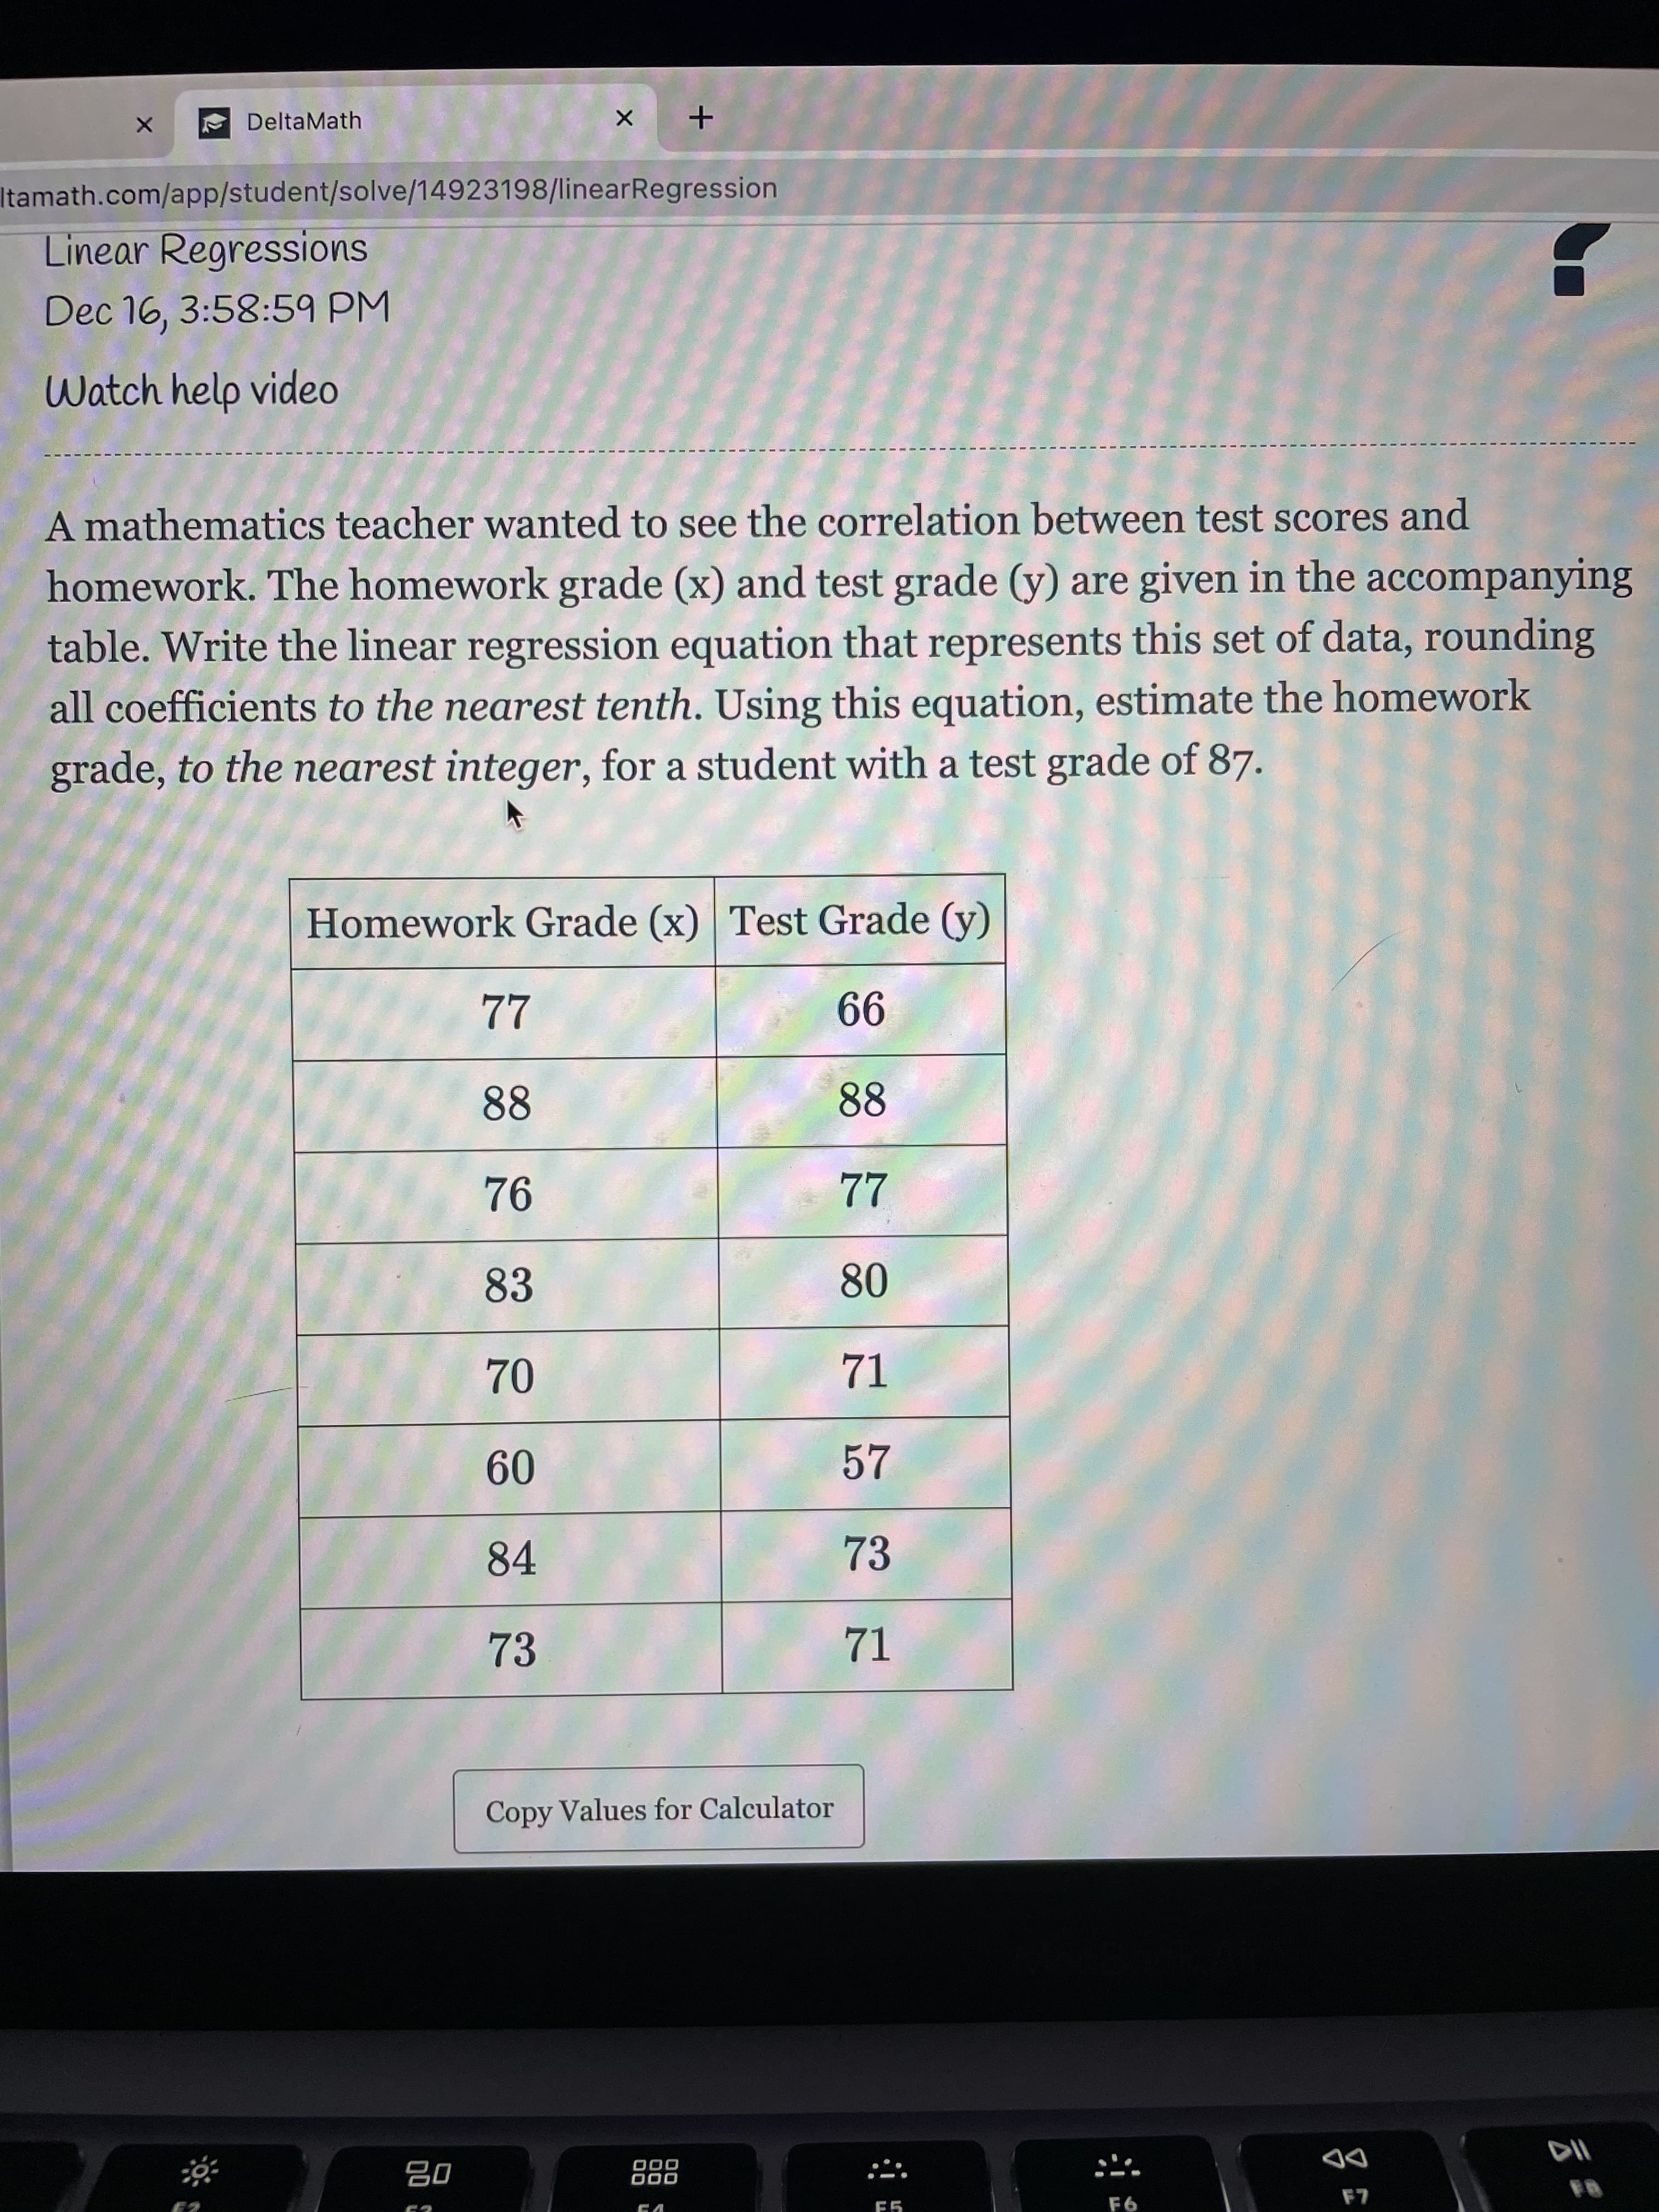 80
* DeltaMath
Itamath.com/app/student/solve/14923198/linearRegression
Linear Regressions
Dec 16, 3:58:59 PM
Watch help video
A mathematics teacher wanted to see the correlation between test scores and
homework. The homework grade (x) and test grade (y) are given in the accompanying
table. Write the linear regression equation that represents this set of data, rounding
all coefficients to the nearest tenth. Using this equation, estimate the homework
grade, to the nearest integer, for a student with a test grade of 87.
Homework Grade (x) Test Grade (y)
77
99
88
88
94
22
83
71
09
84
73
73
Copy Values for Calculator
000
000
DD
LA
